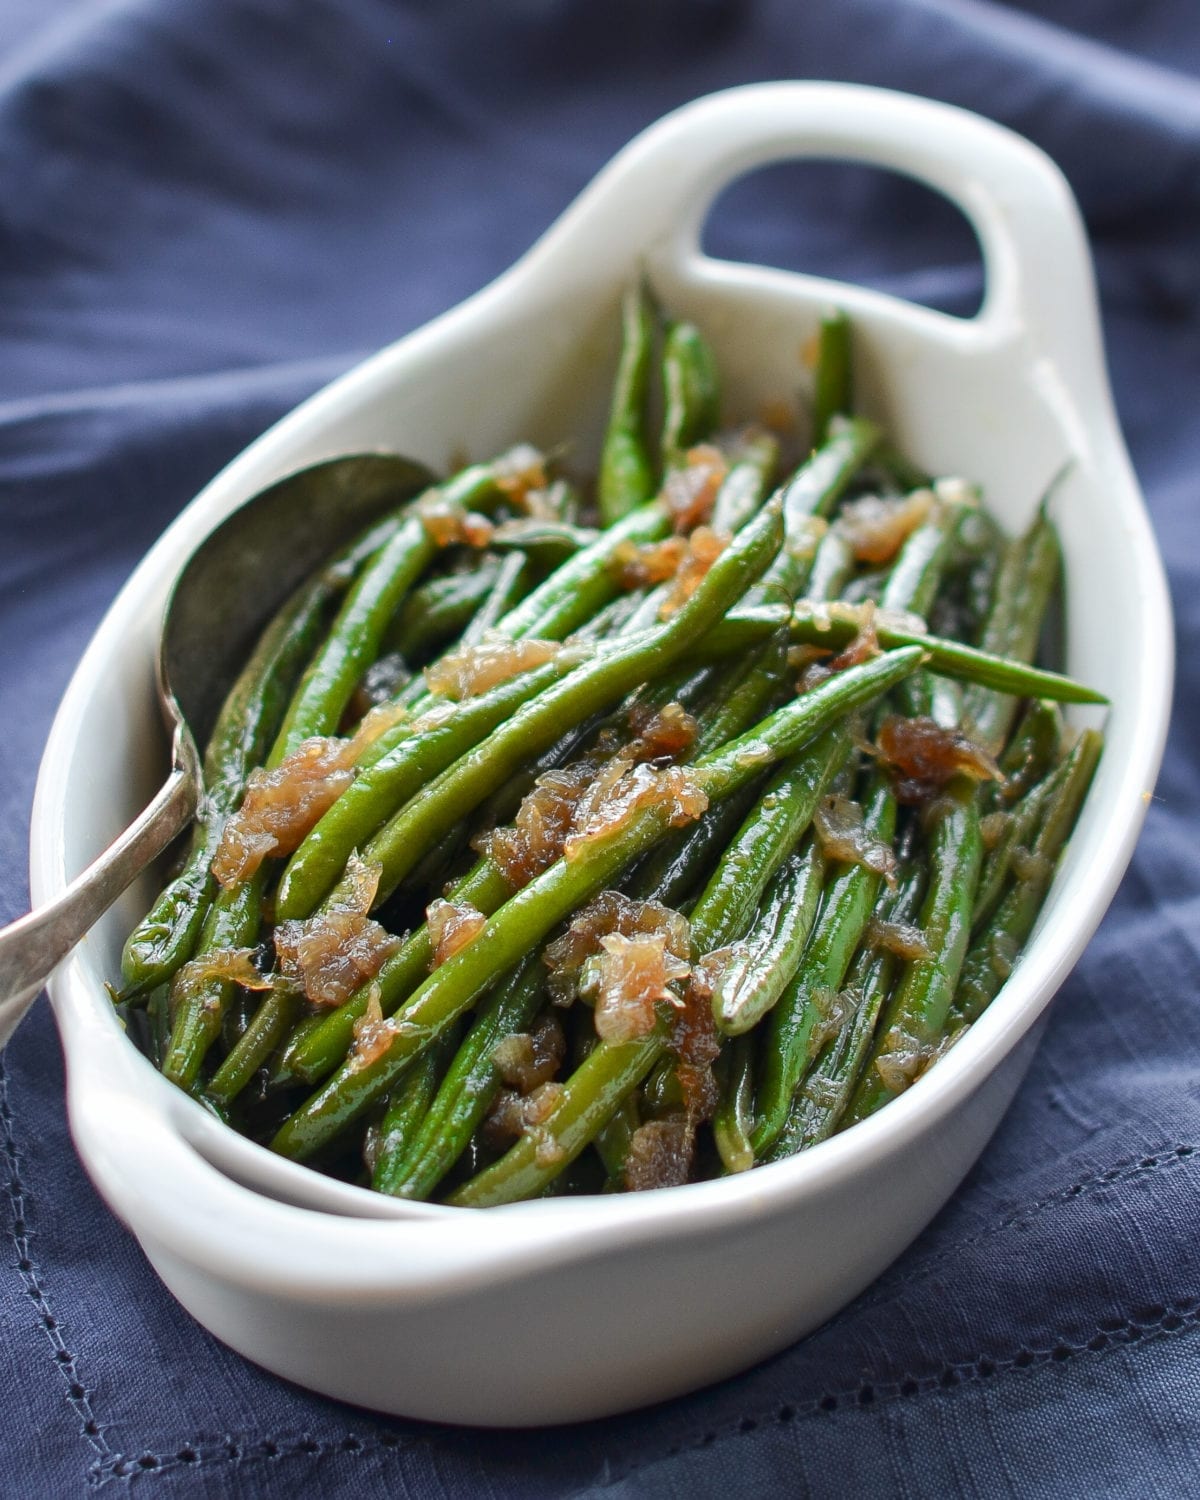 What's the Difference Between Haricot Verts and Green Beans?